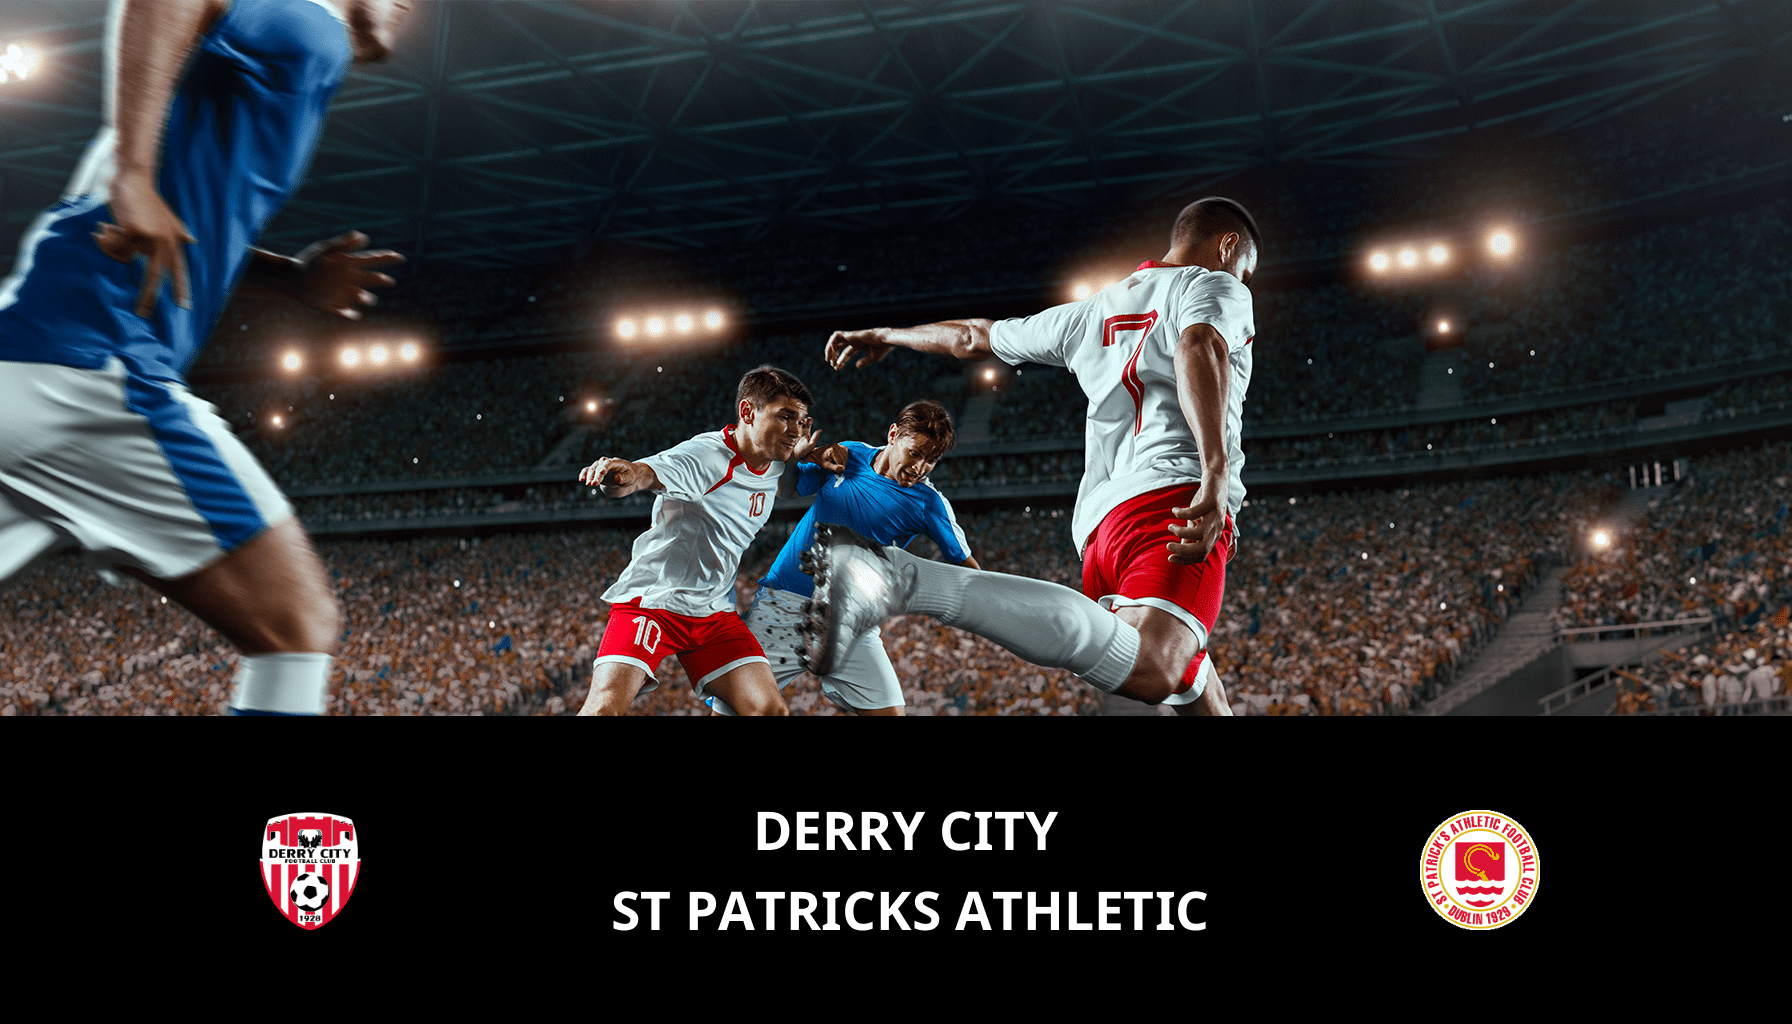 Previsione per Derry City VS St Patricks Athl il 22/04/2024 Analysis of the match